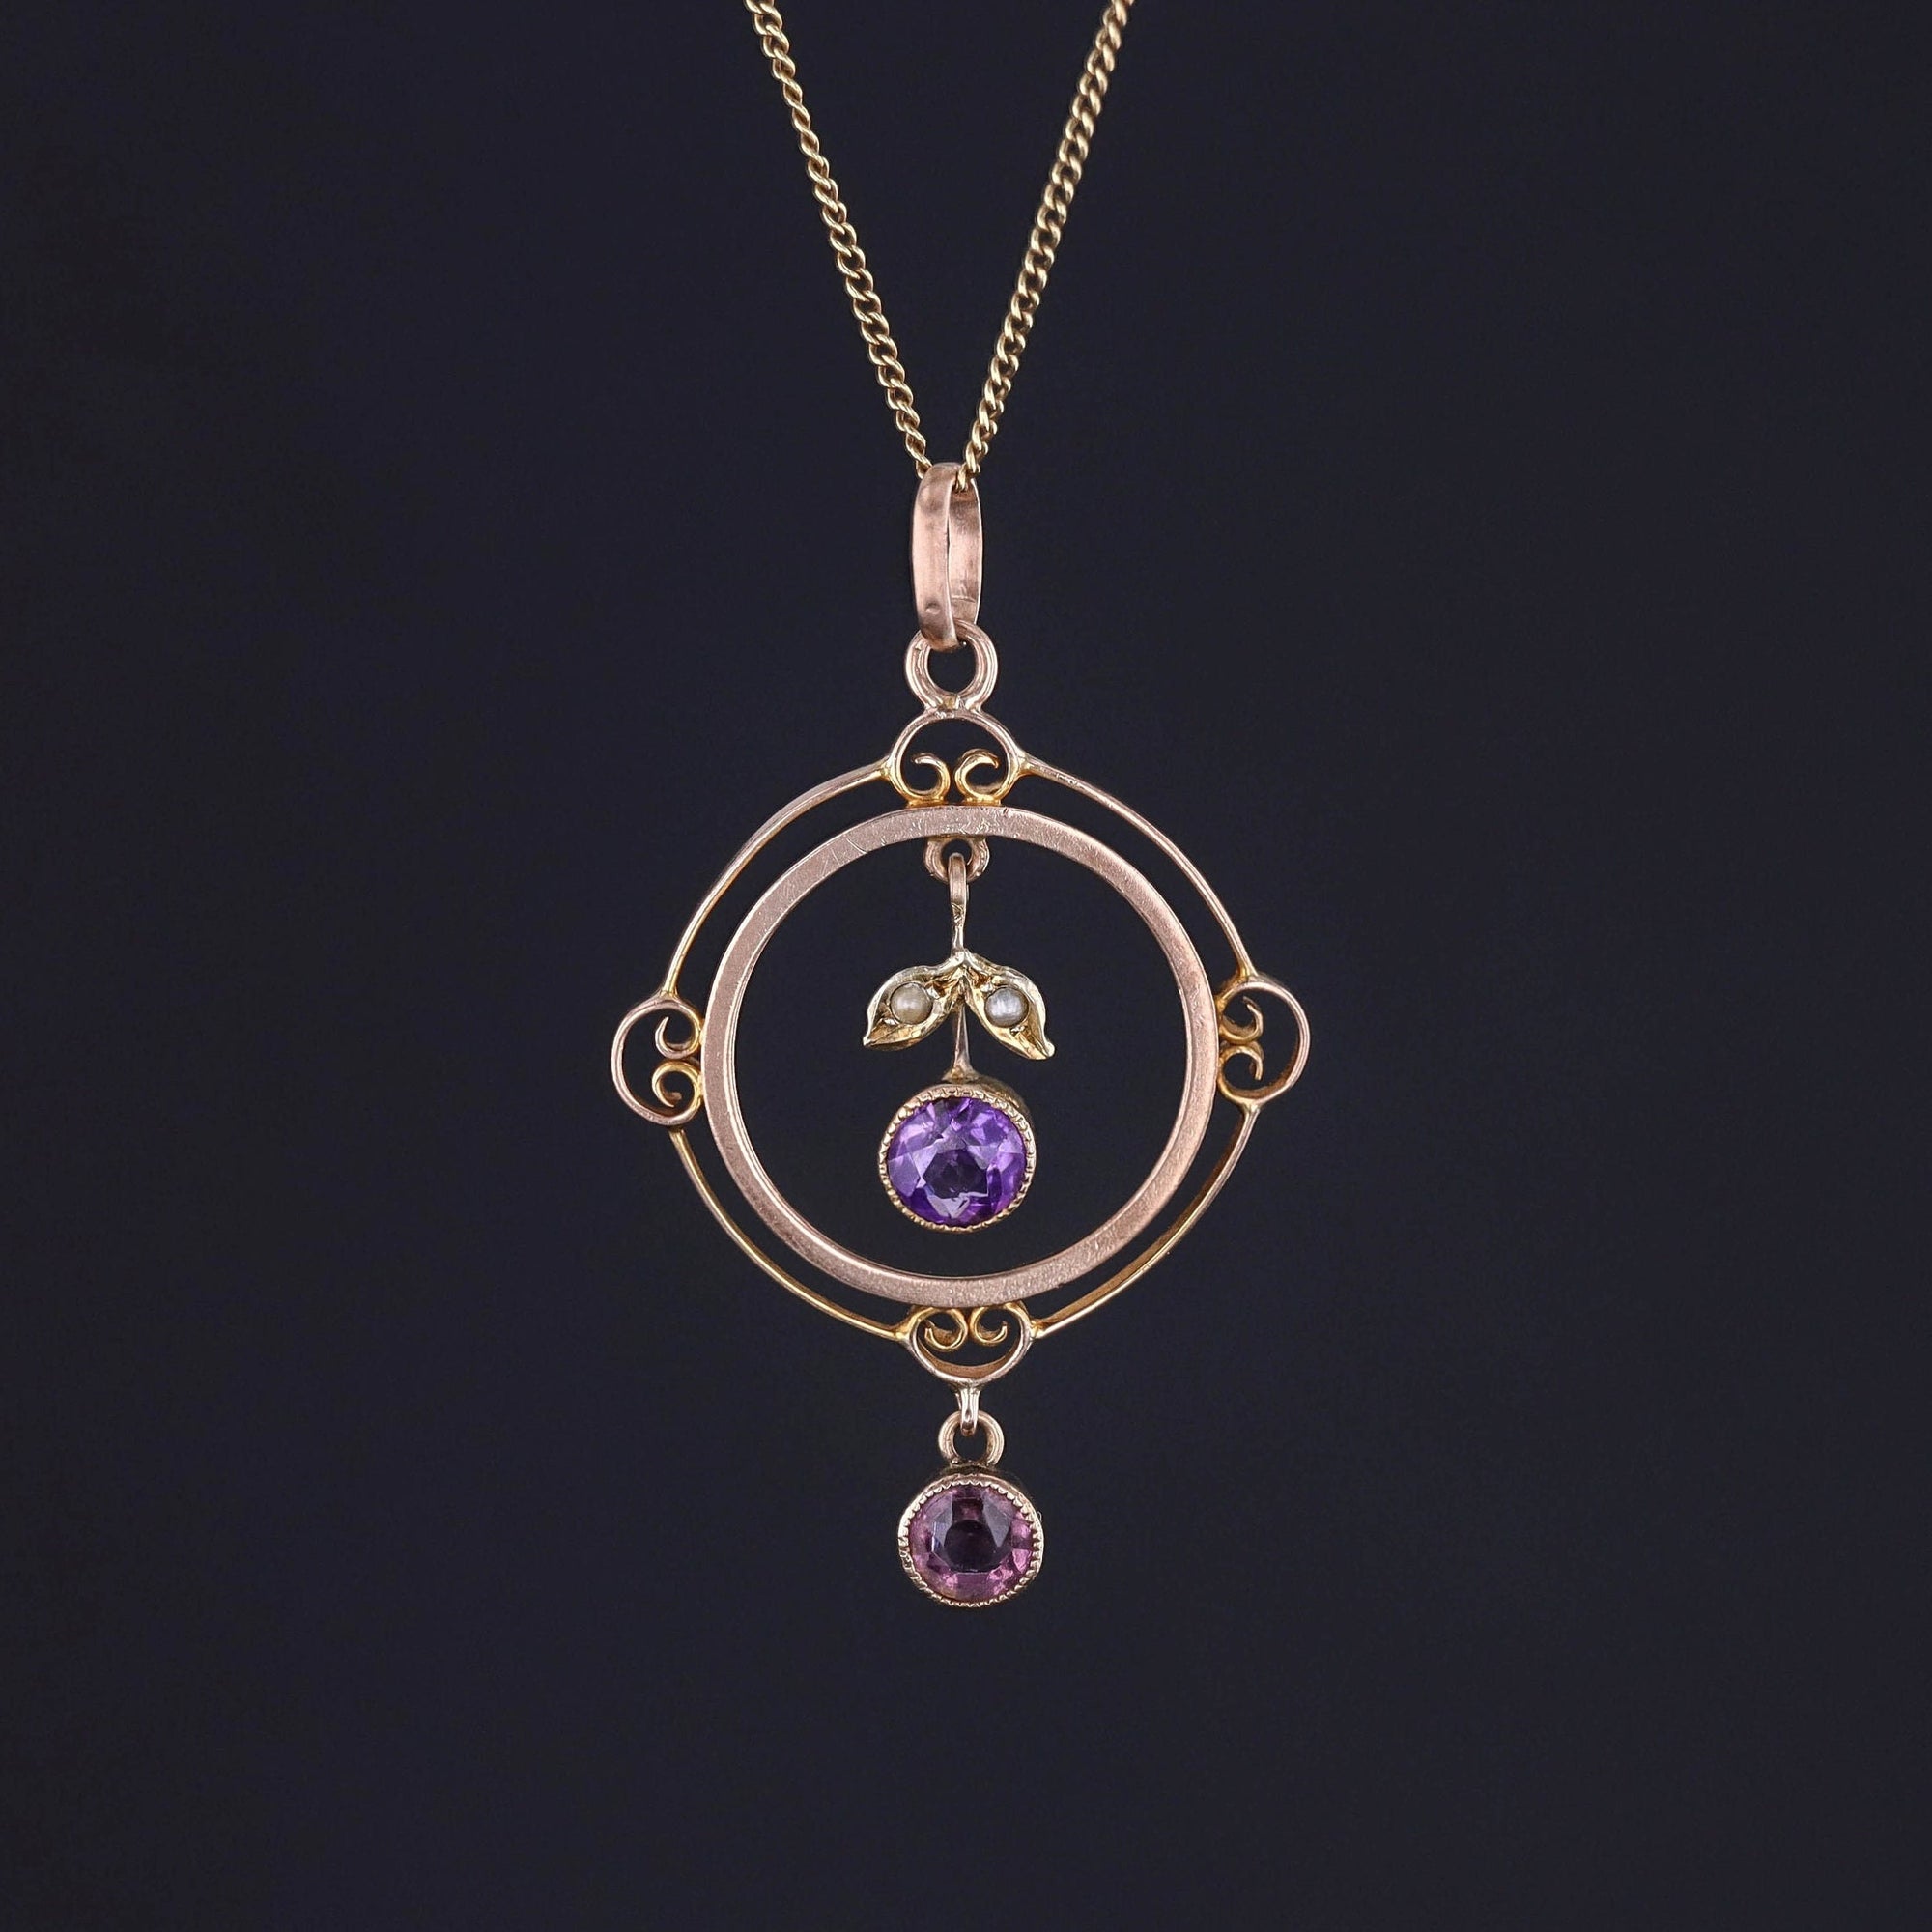 Antique Amethyst and Purple Glass Pendant of 9ct Gold